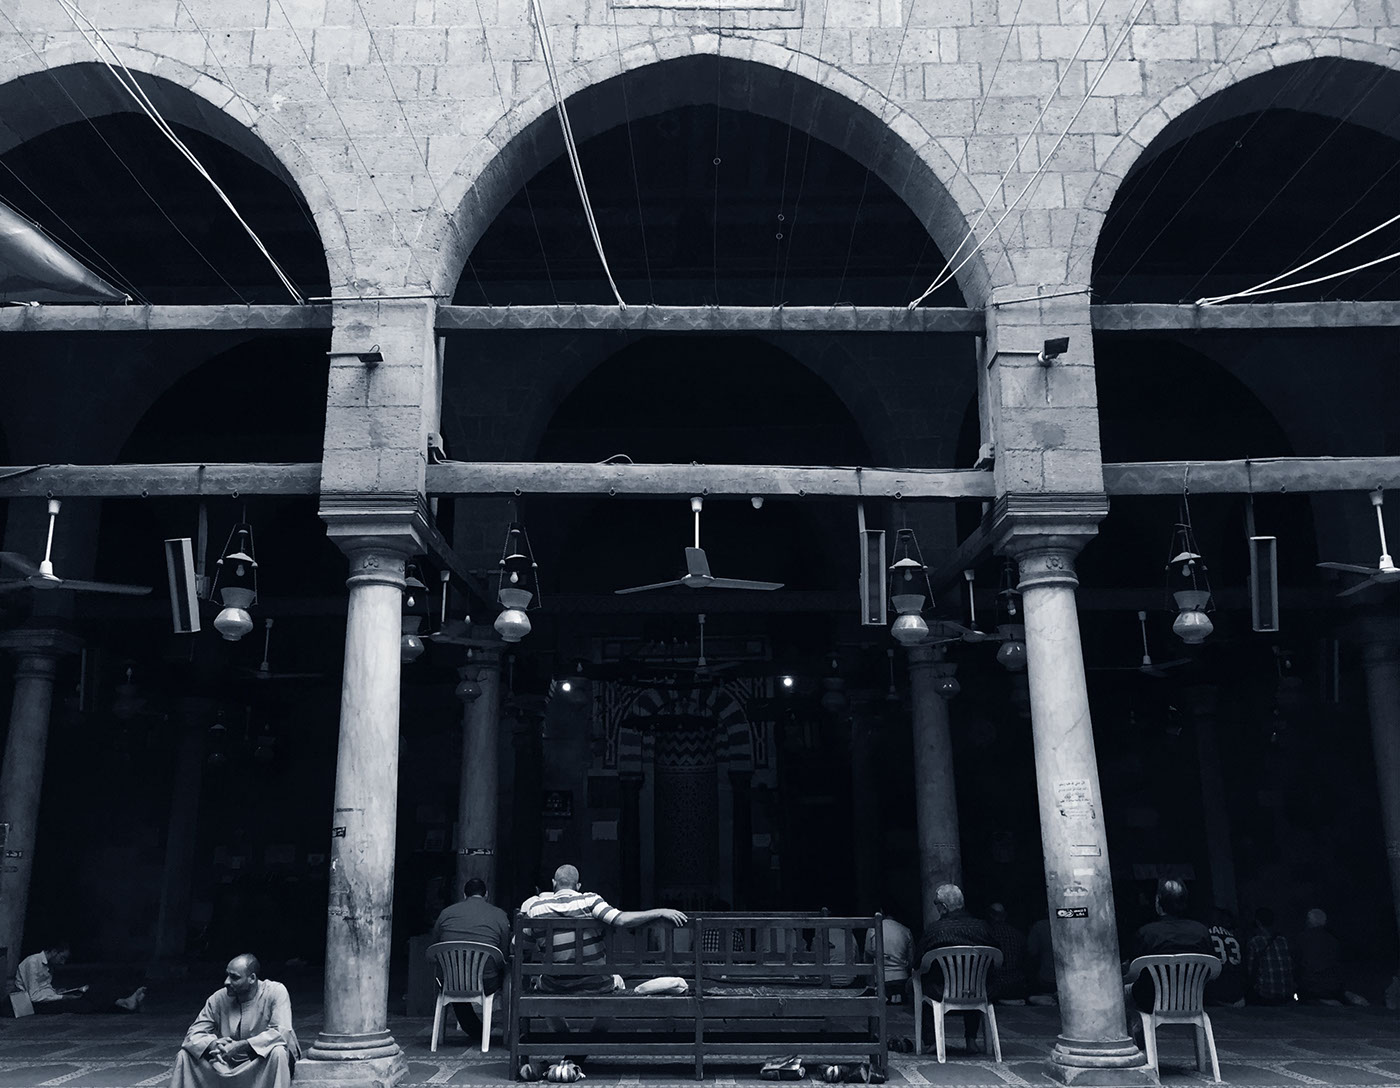 #documenting #photography #cairo  #oldcairo #islamiccairo #Legacy #minarets #finearts